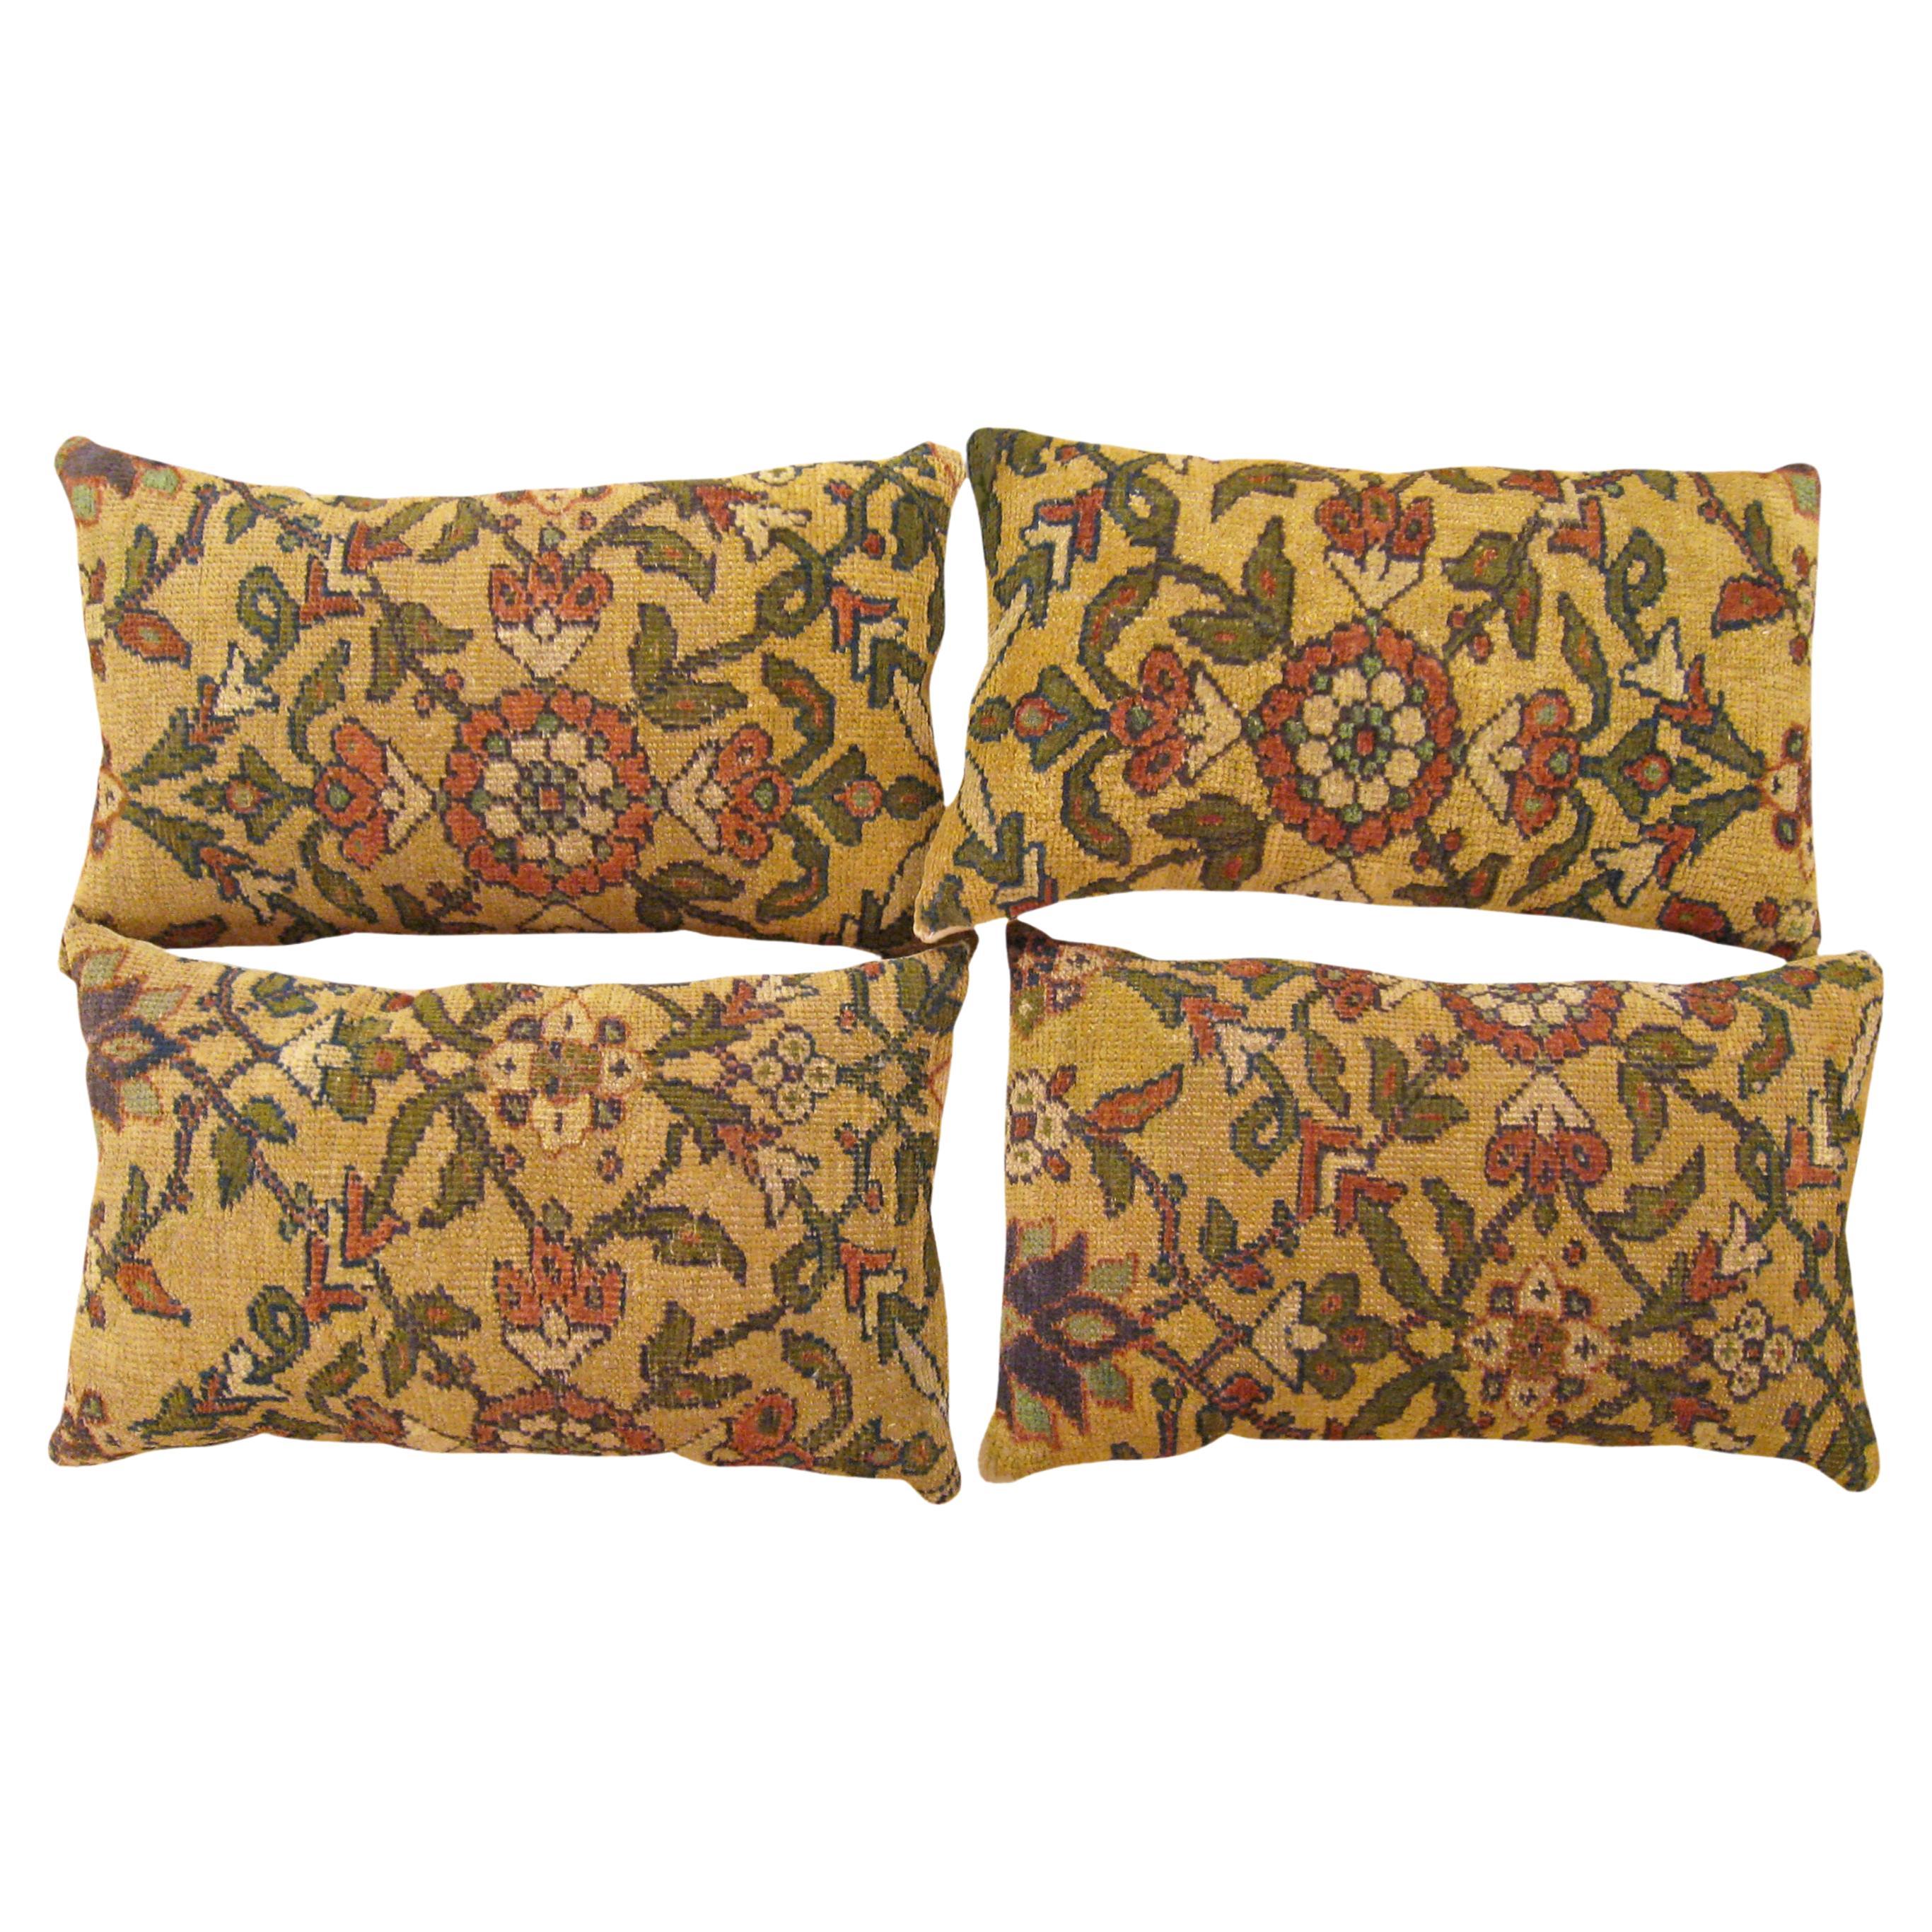 Set of Decorative Antique Persian Sultanabad Carpet Pillows with Floral